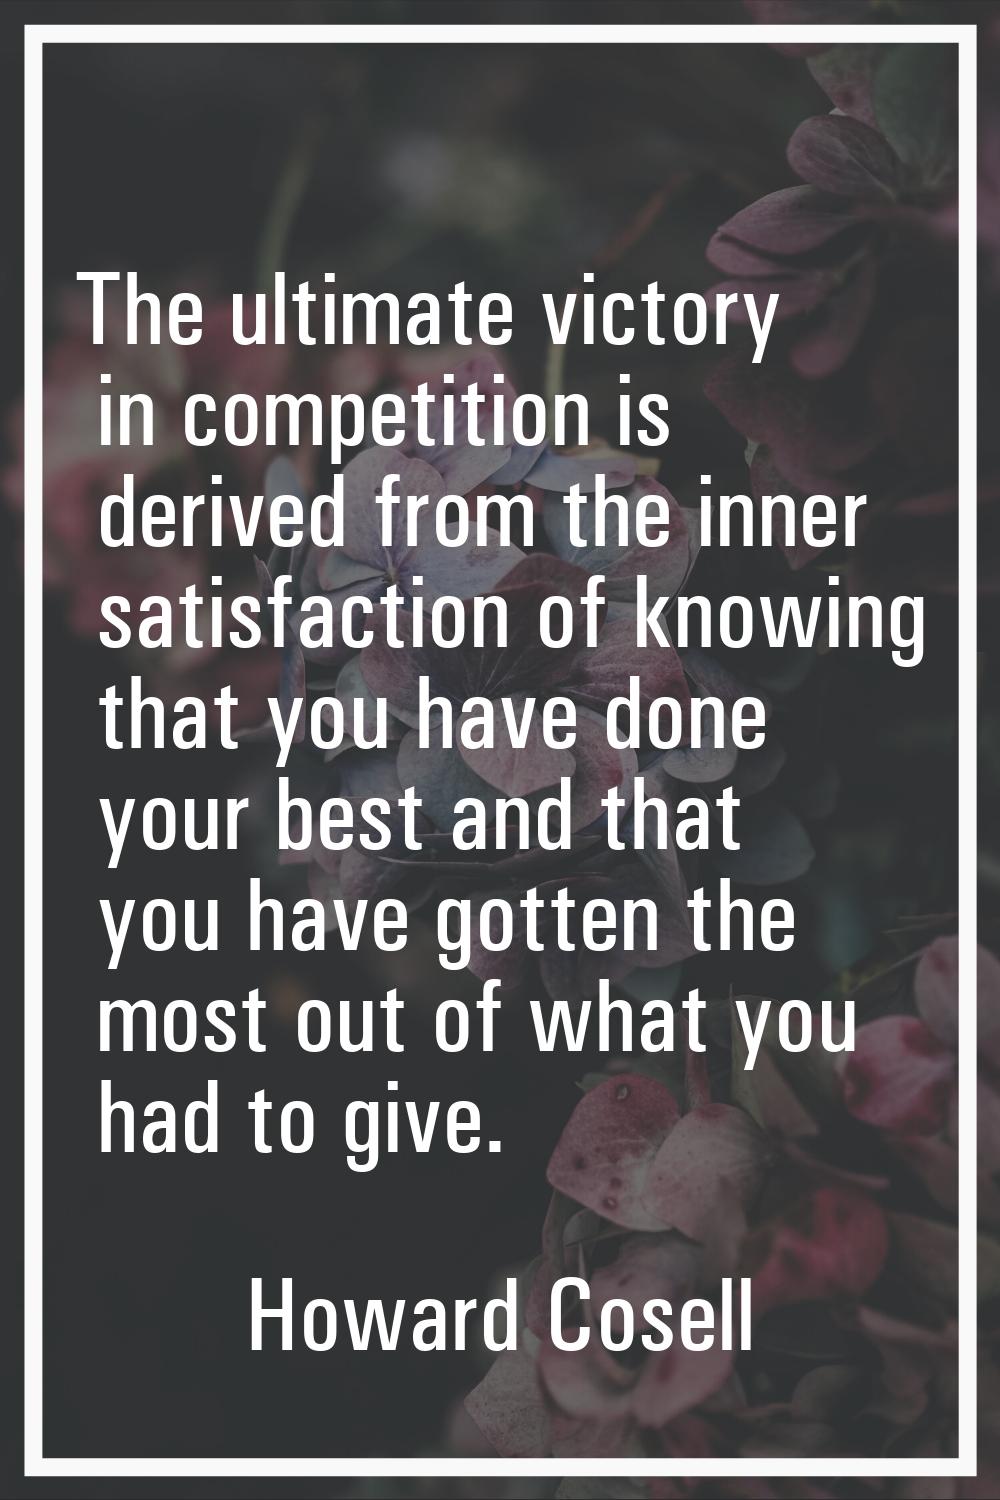 The ultimate victory in competition is derived from the inner satisfaction of knowing that you have